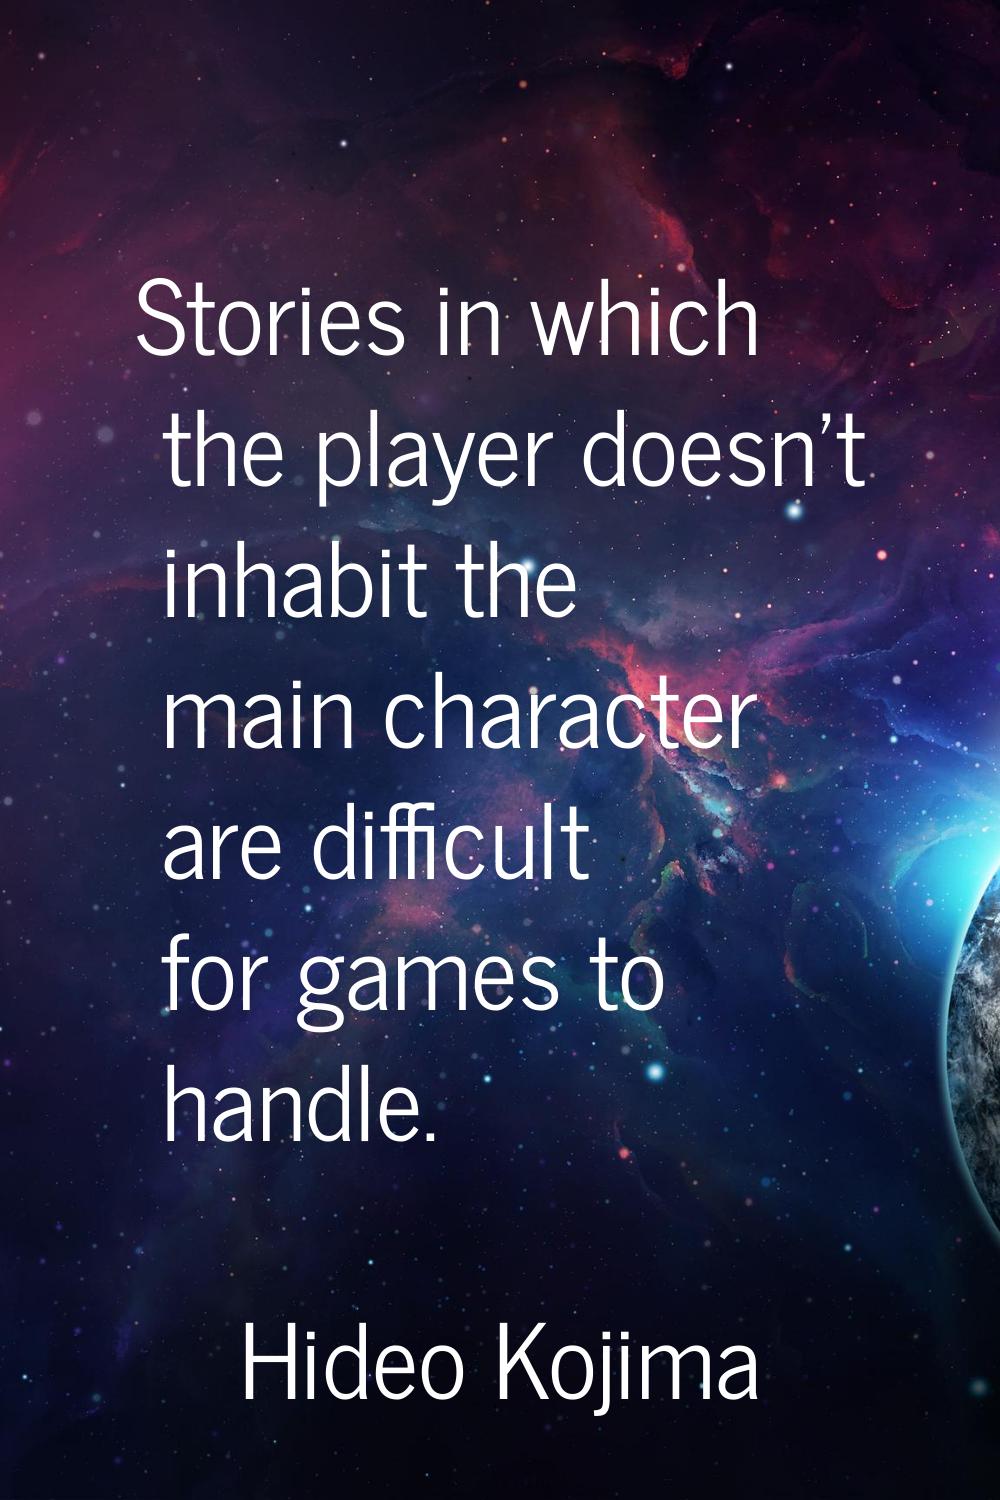 Stories in which the player doesn't inhabit the main character are difficult for games to handle.